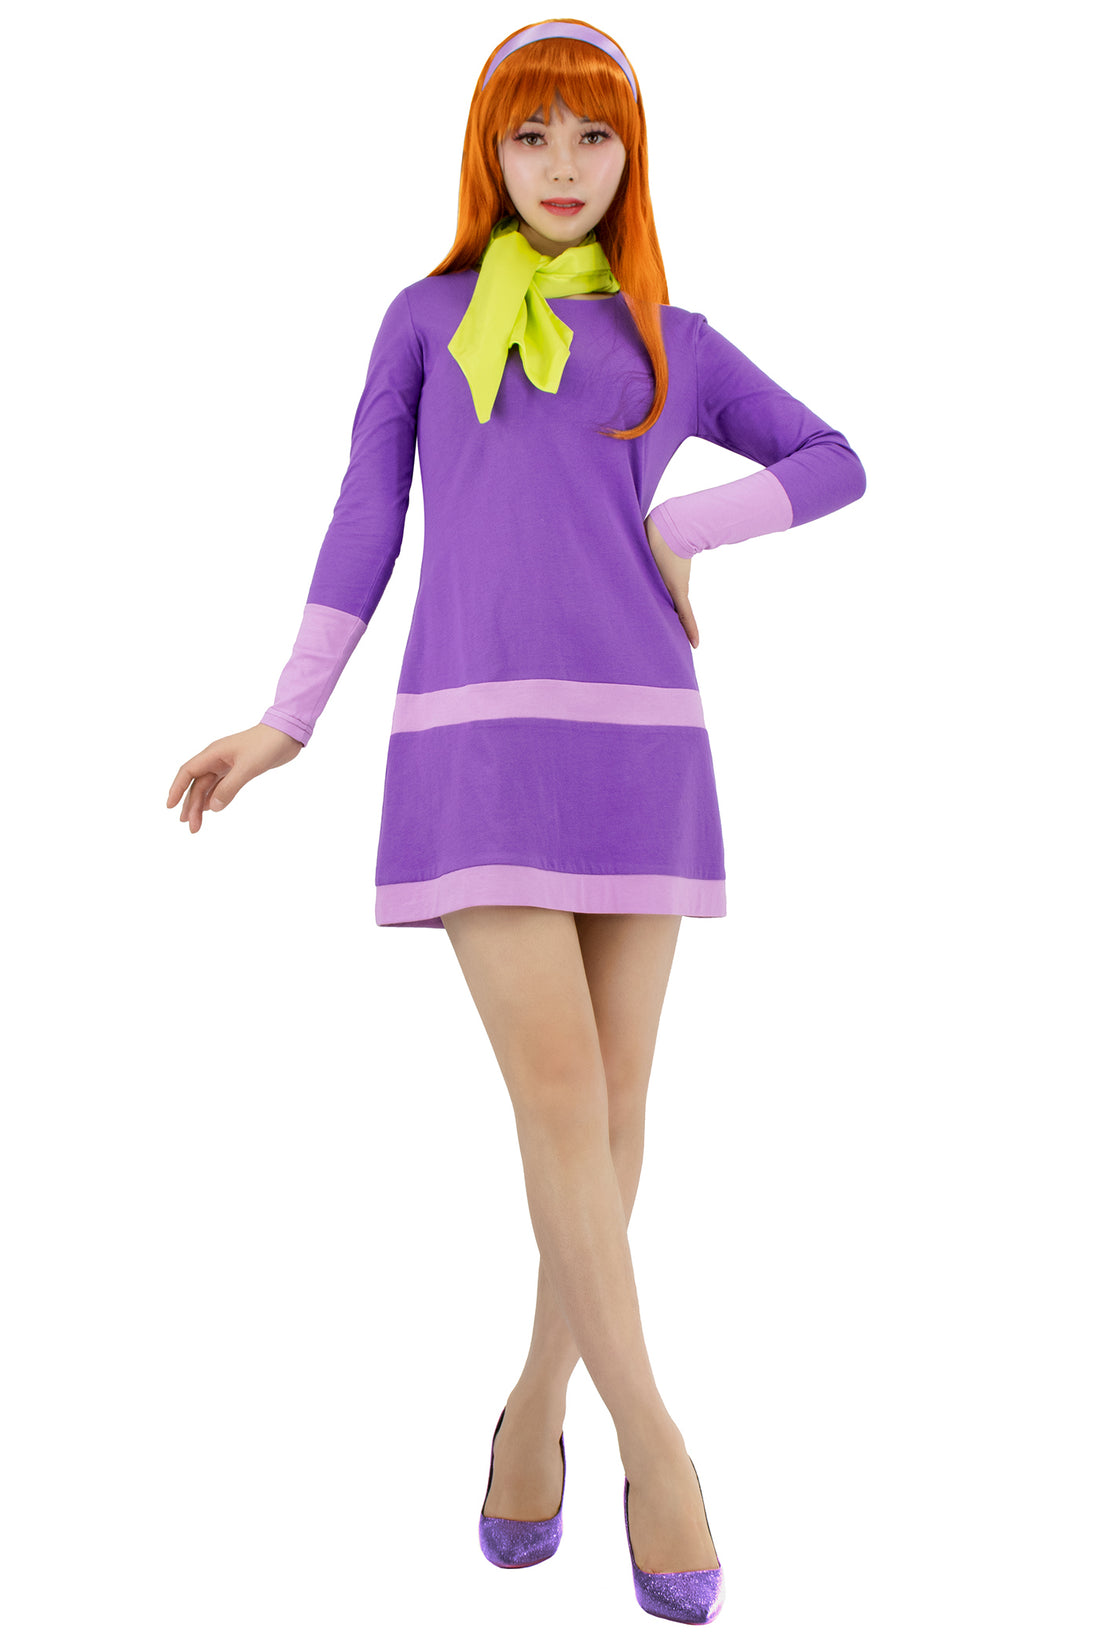 DAZCOS Womens Daphne Cosplay Costume Outfit with Scarf Headband